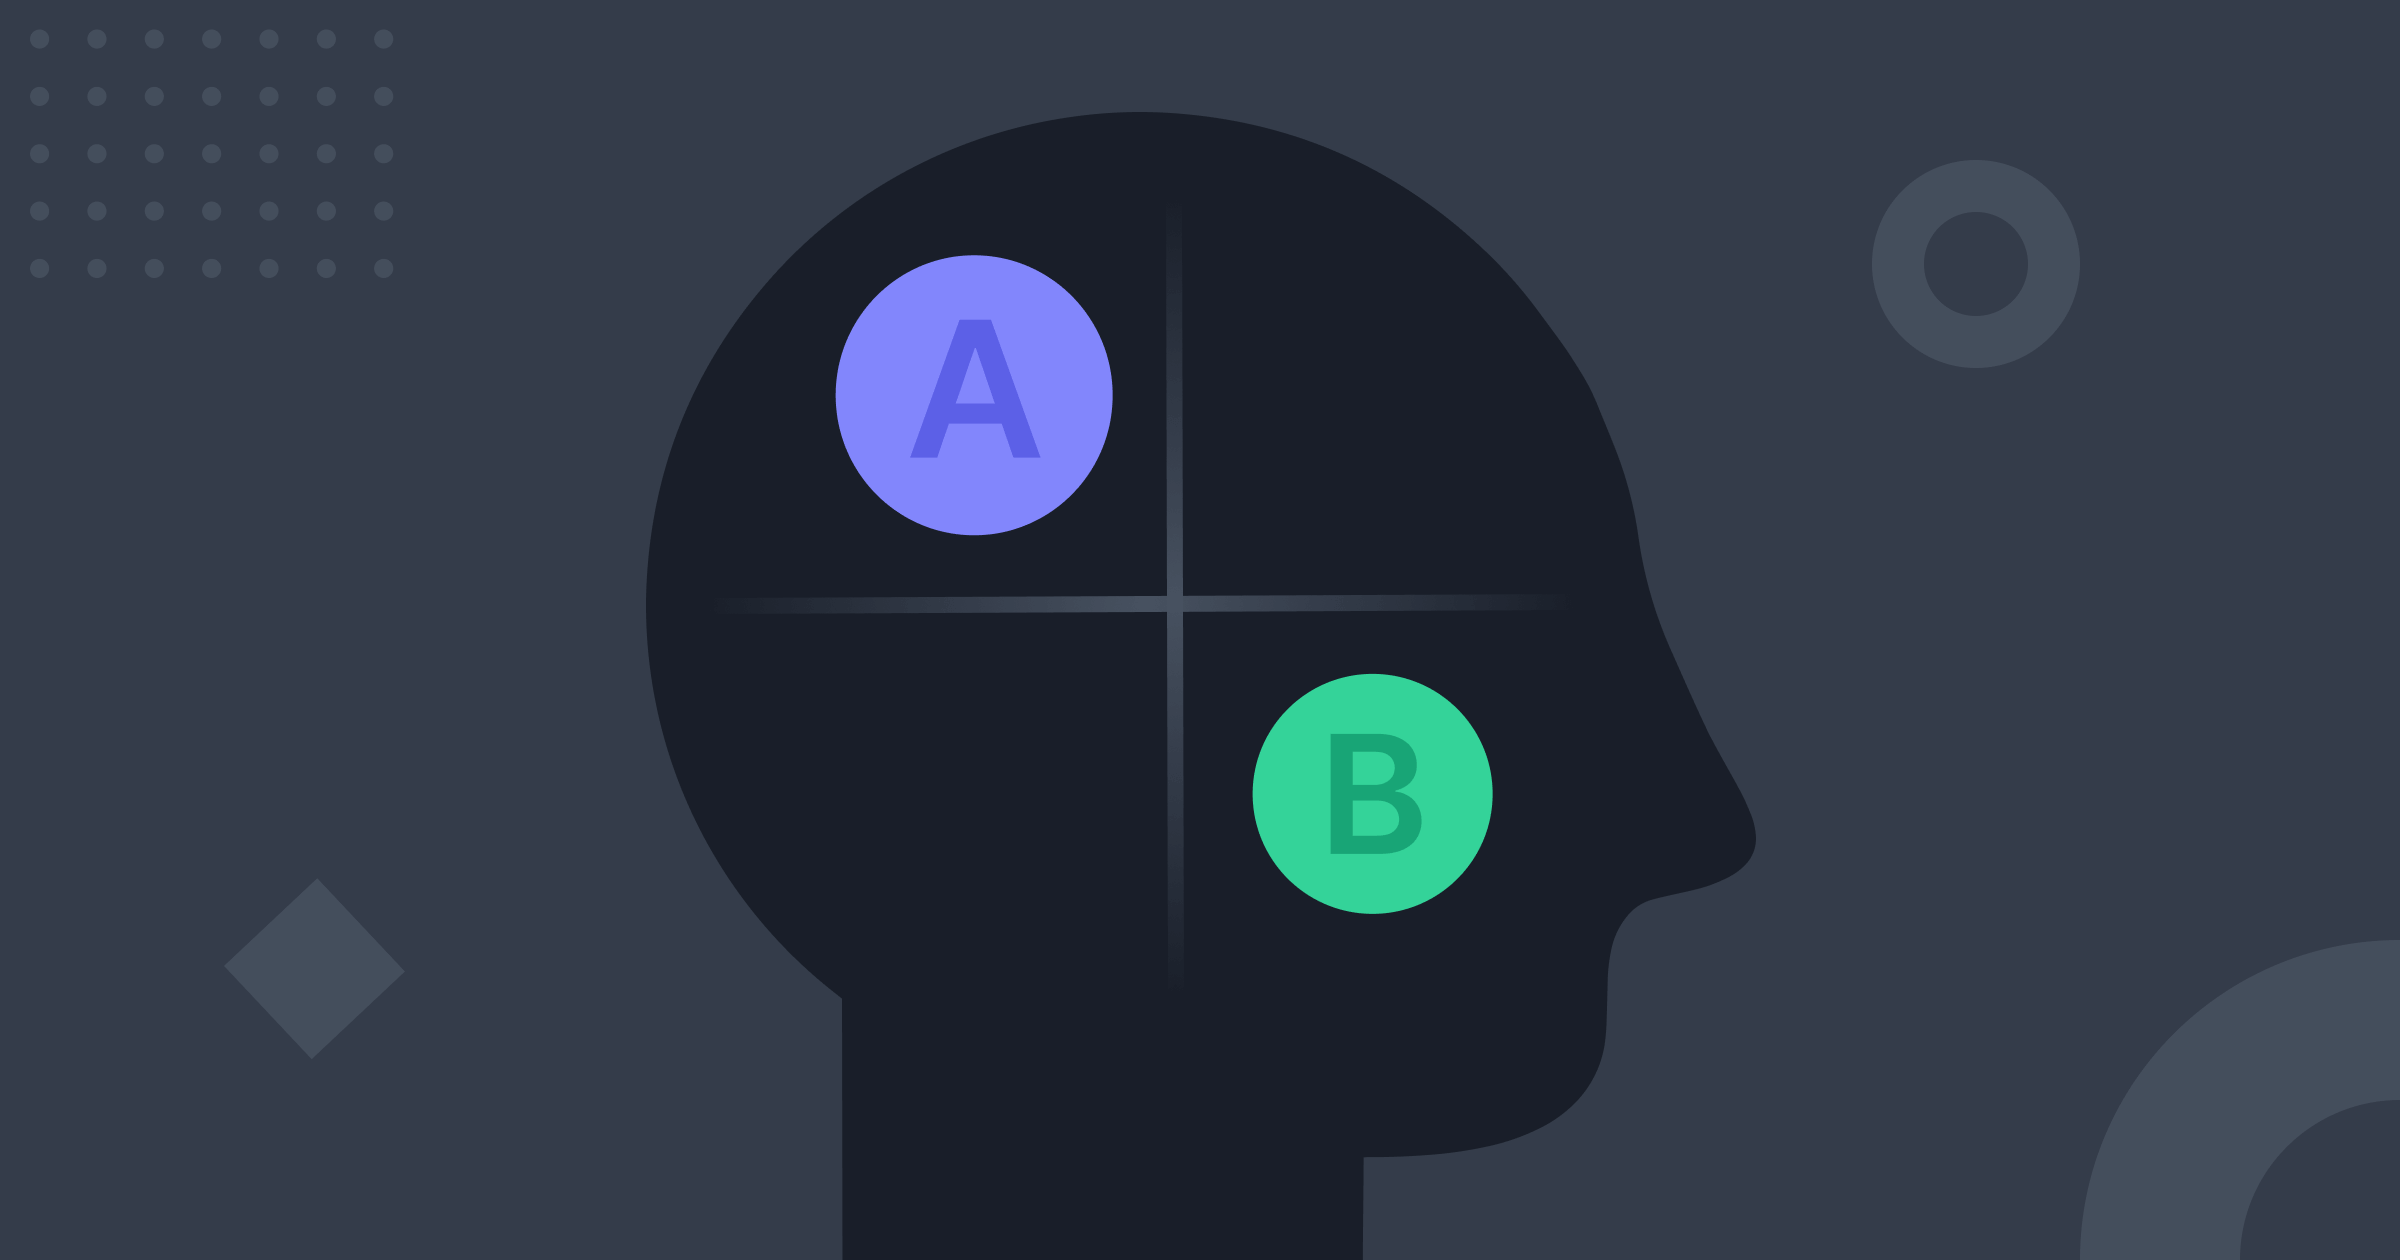 A person's head with a target represents a brand's positioning. On one side of the head there is hypothesis A and, on the other side, hypothesis B, representing an AB test.